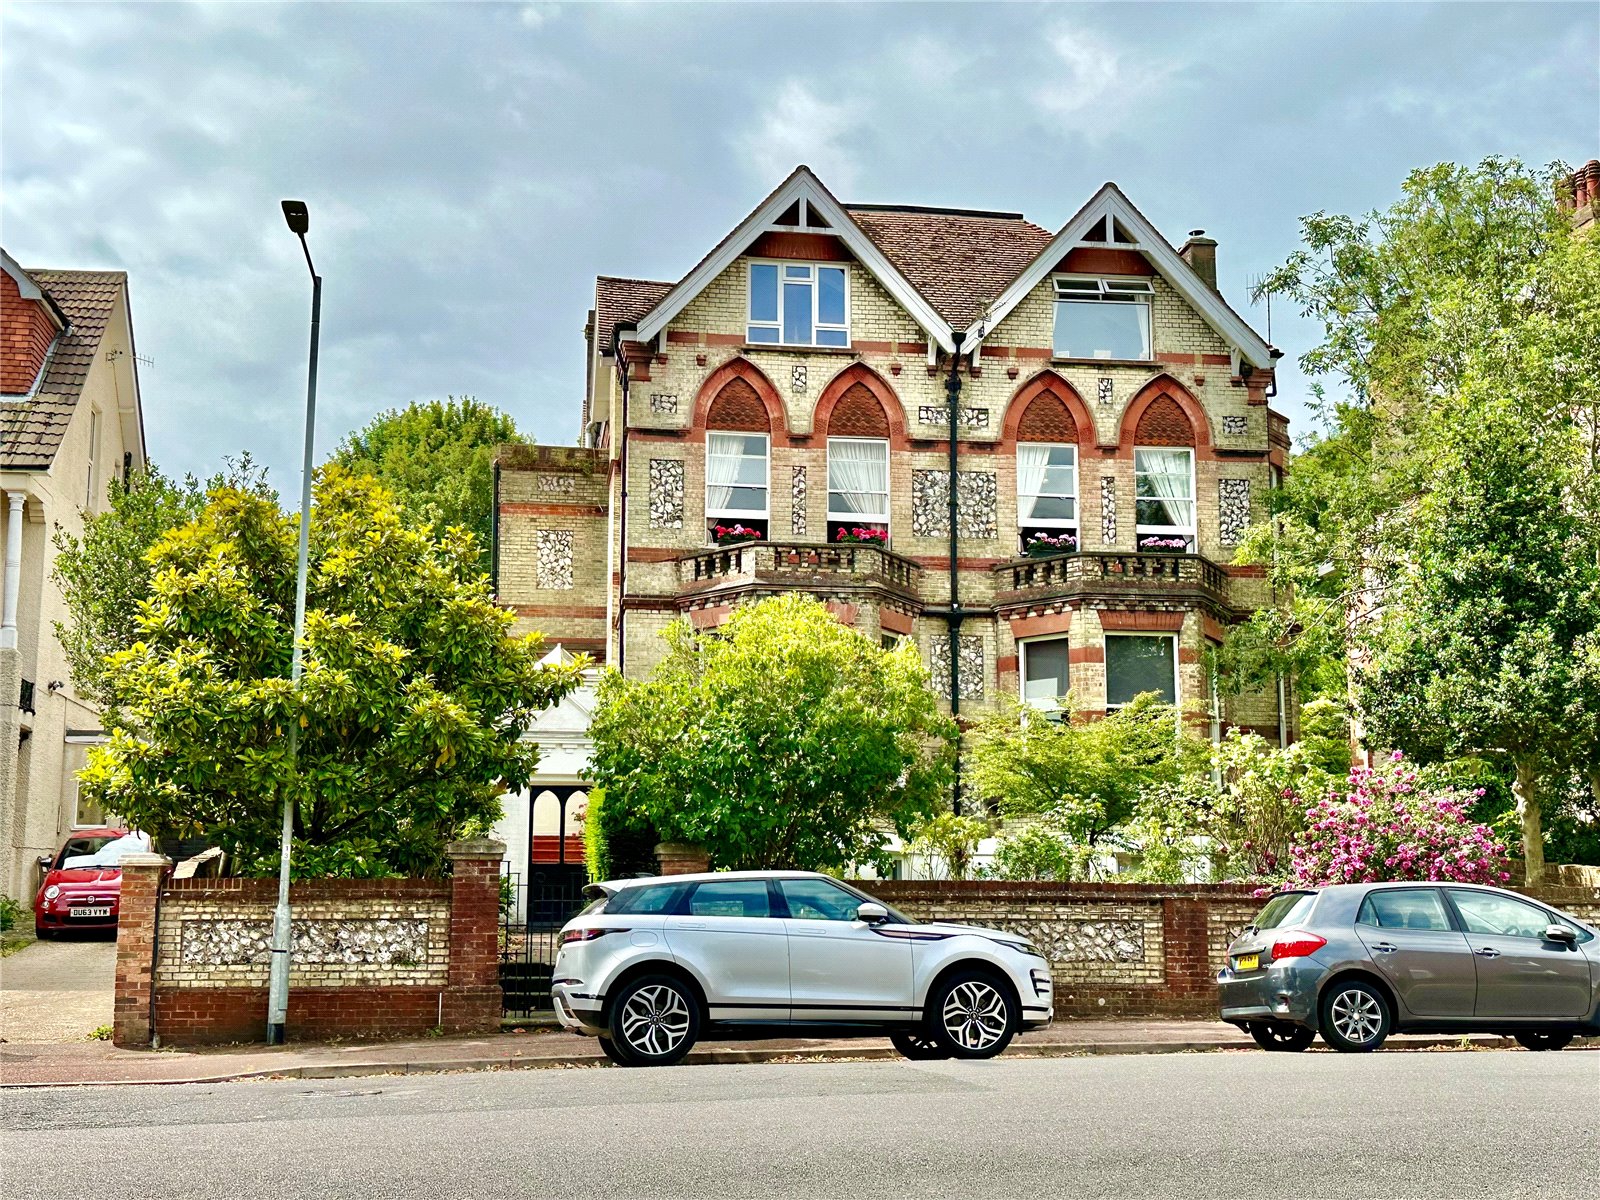 Silverdale Road, Meads, Eastbourne